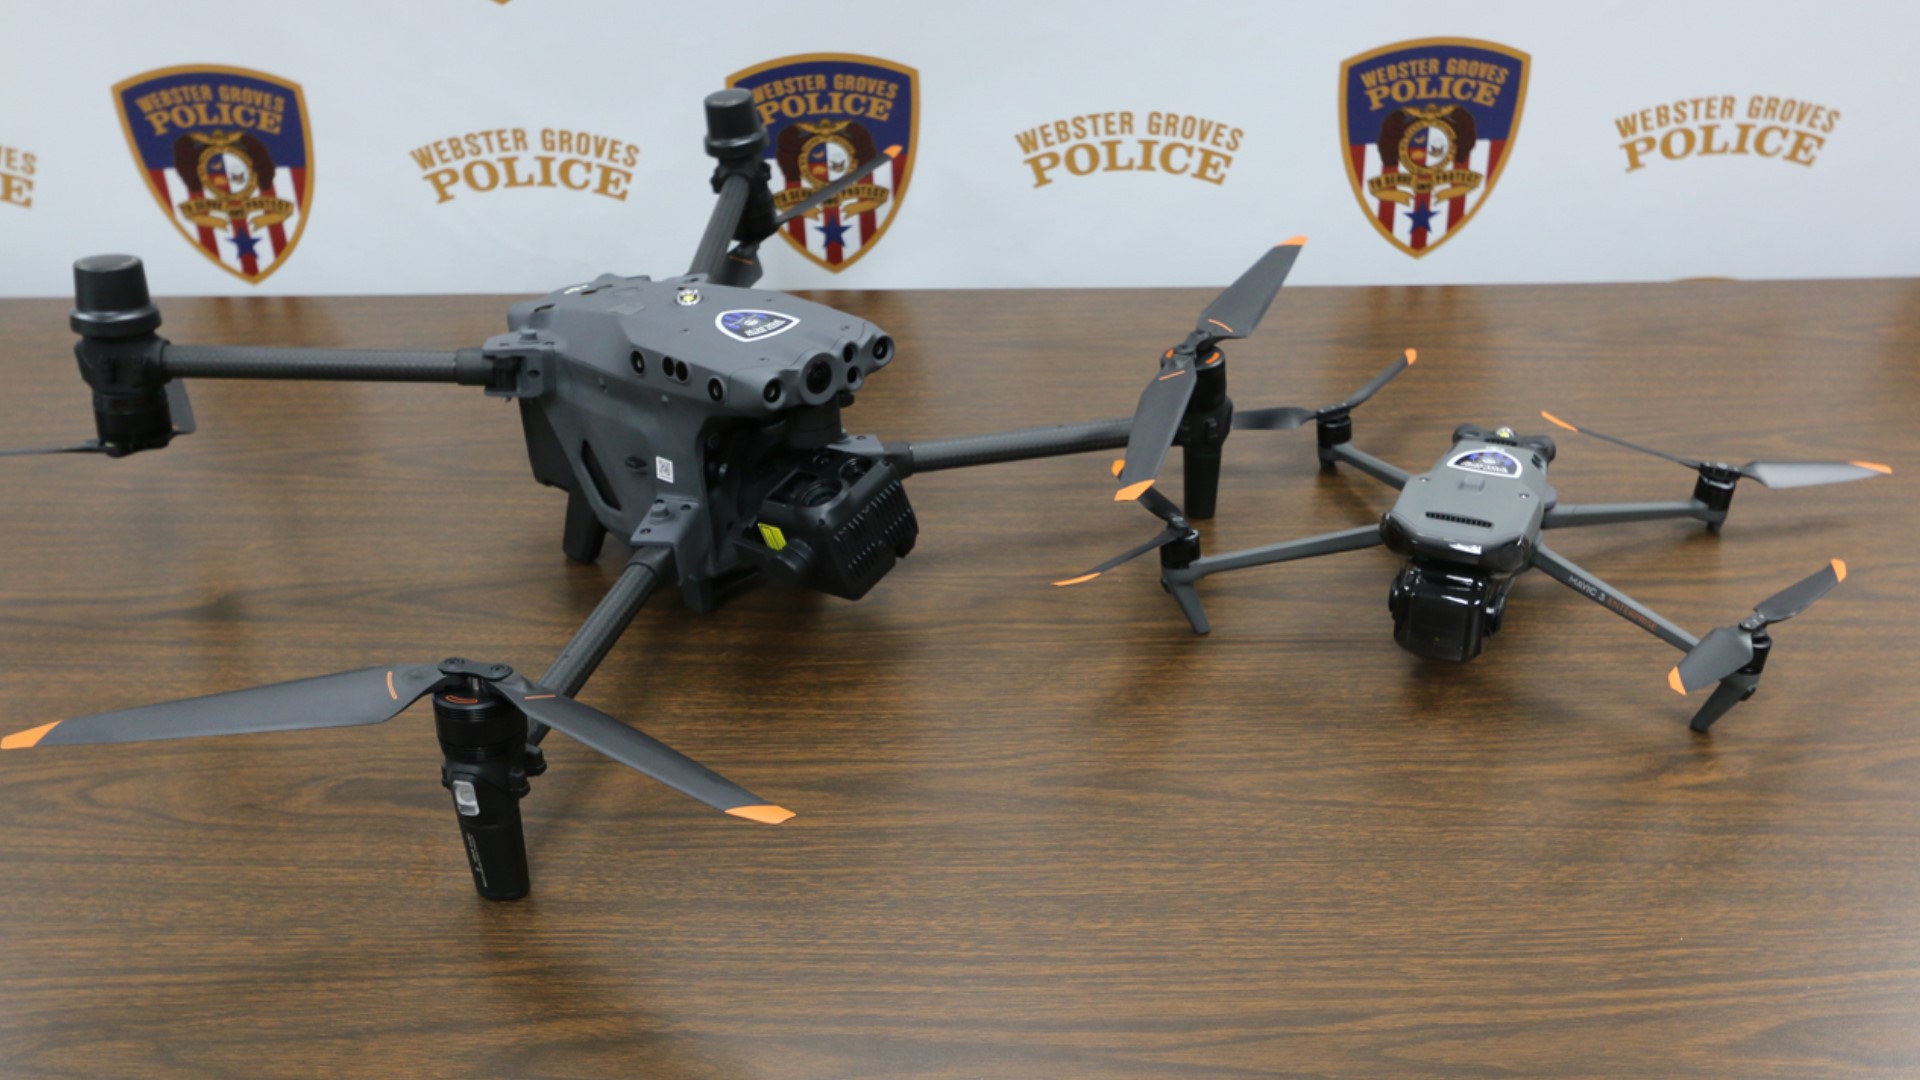 Webster Groves has a new plan to improve safety. The city bought the Webster Groves Police Department two drones for $20,000.